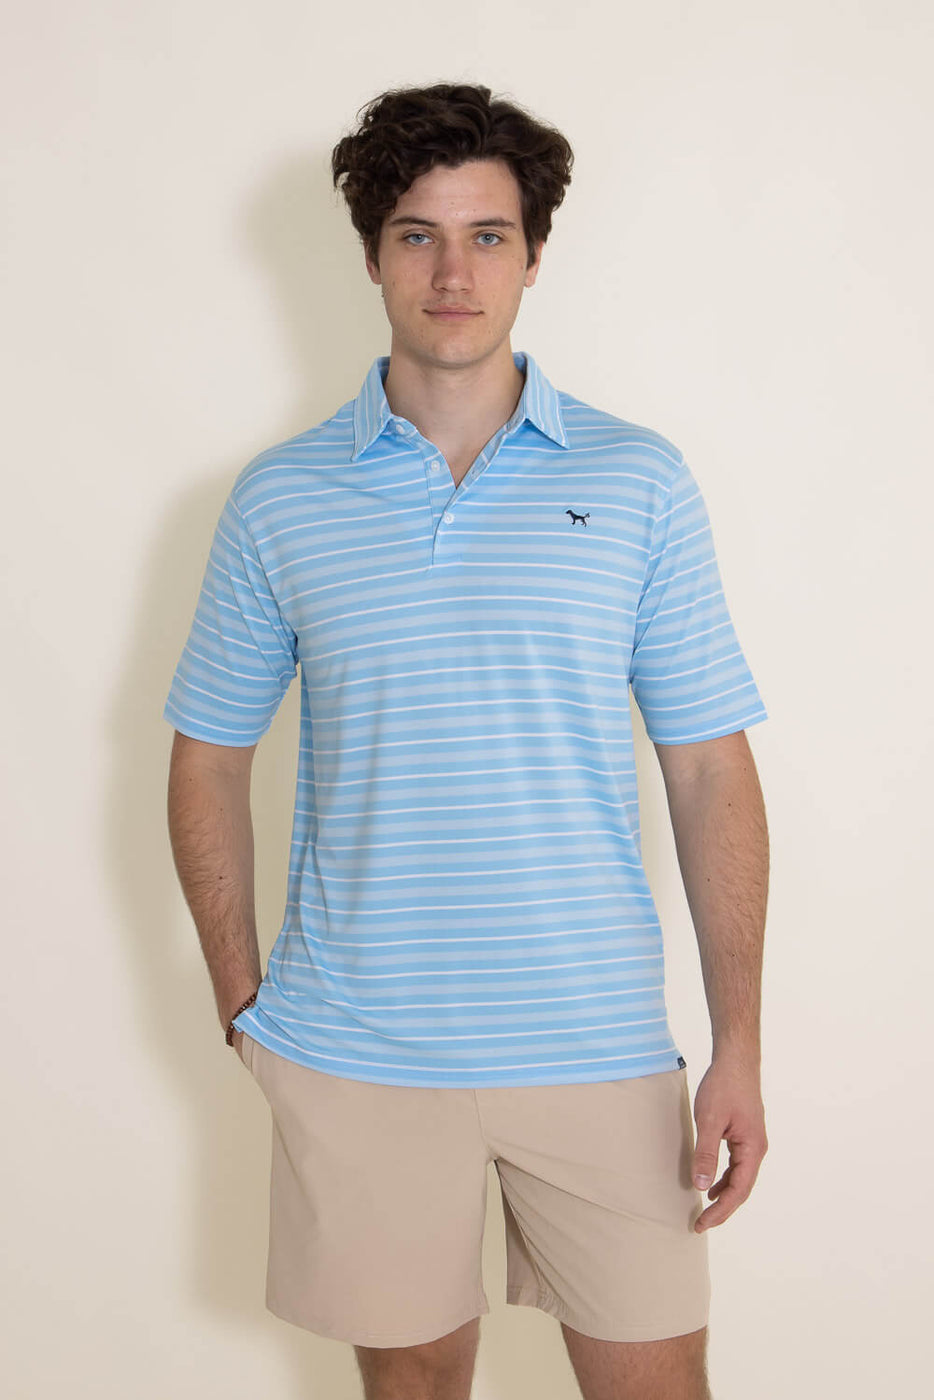 Simply Southern Long Sleeve Colorblock Polo Shirt for Men in Port